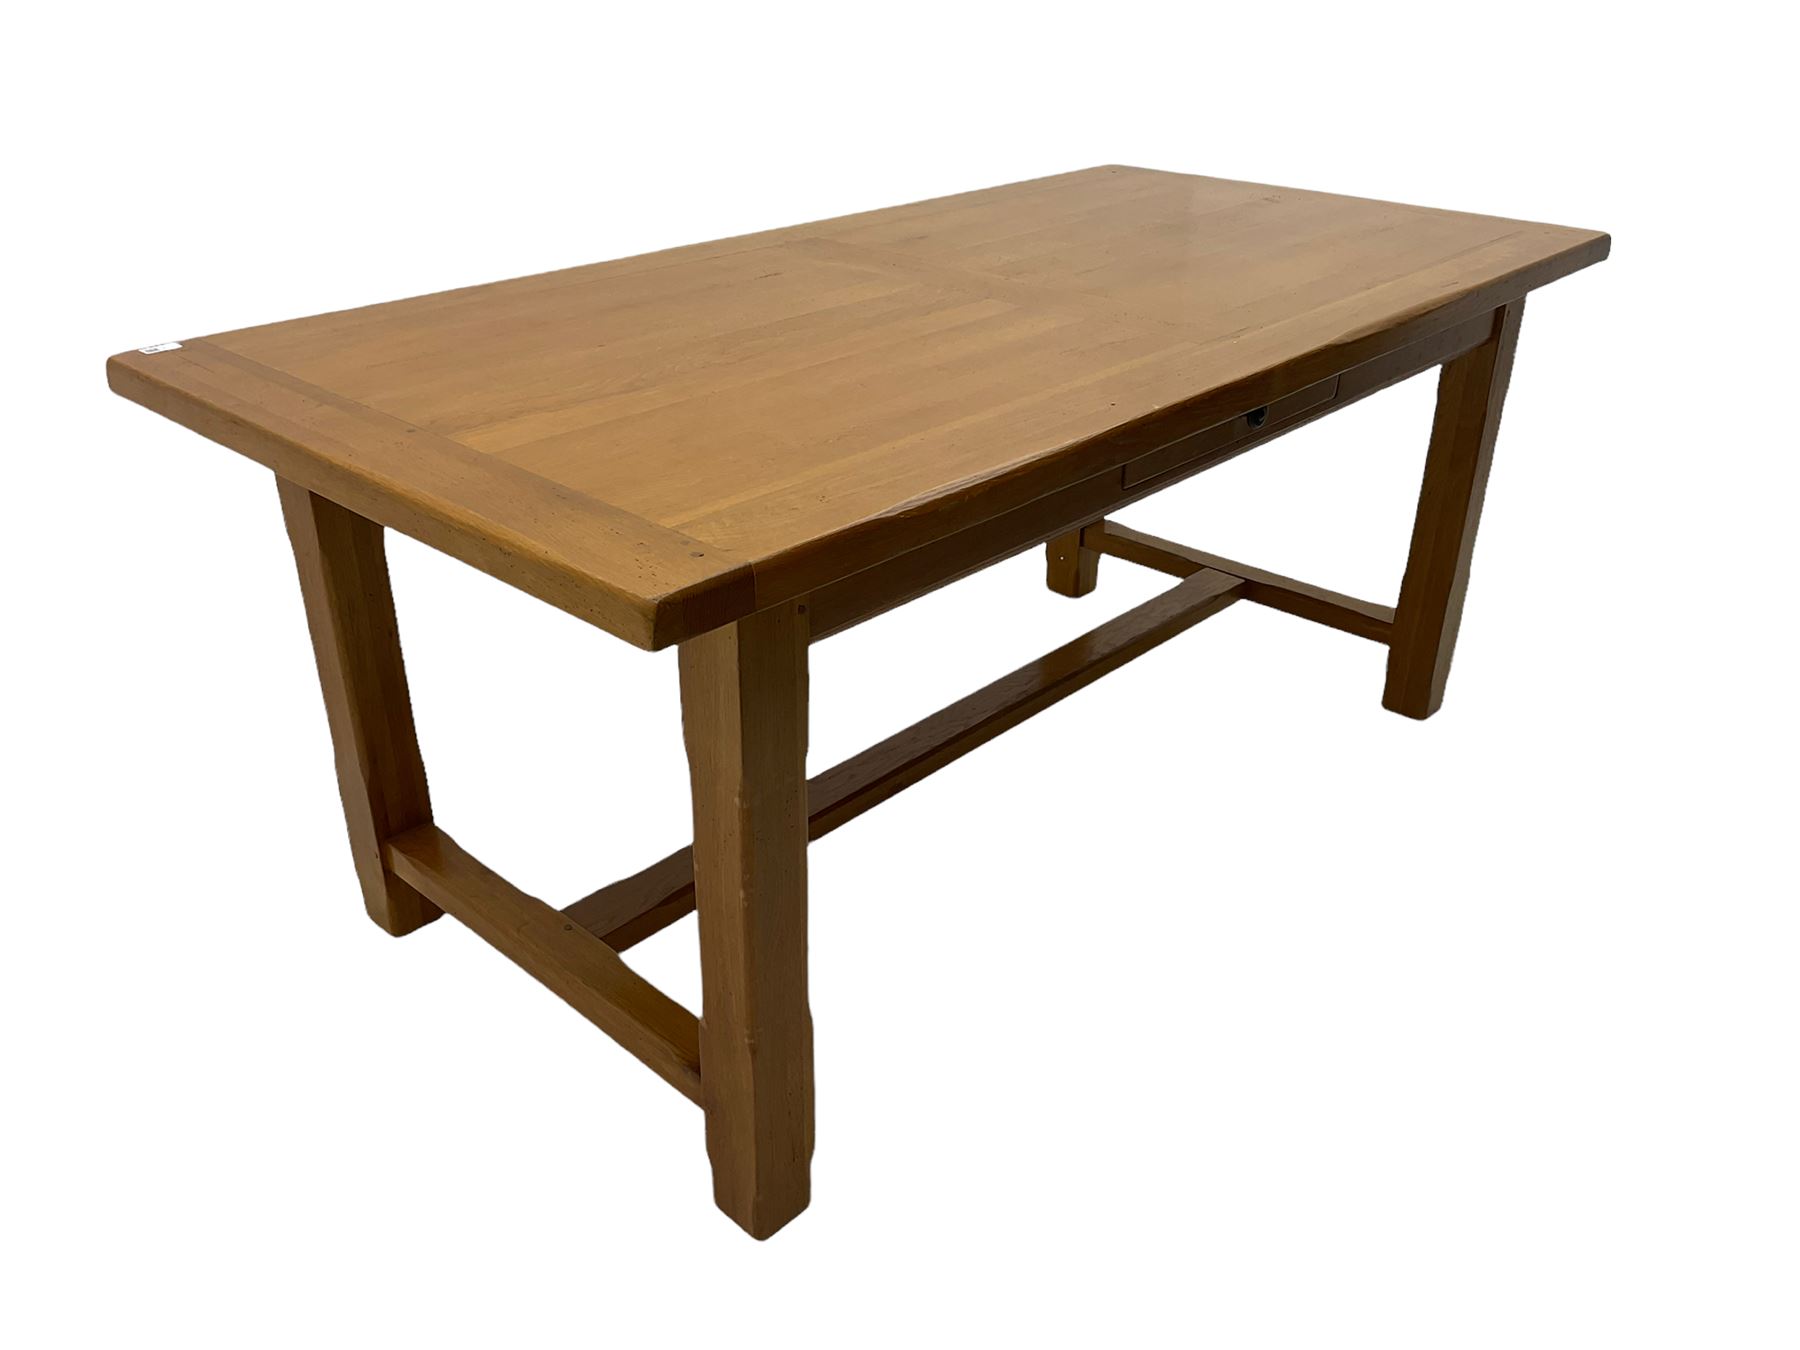 Light oak rectangular dining table with two additional leaves